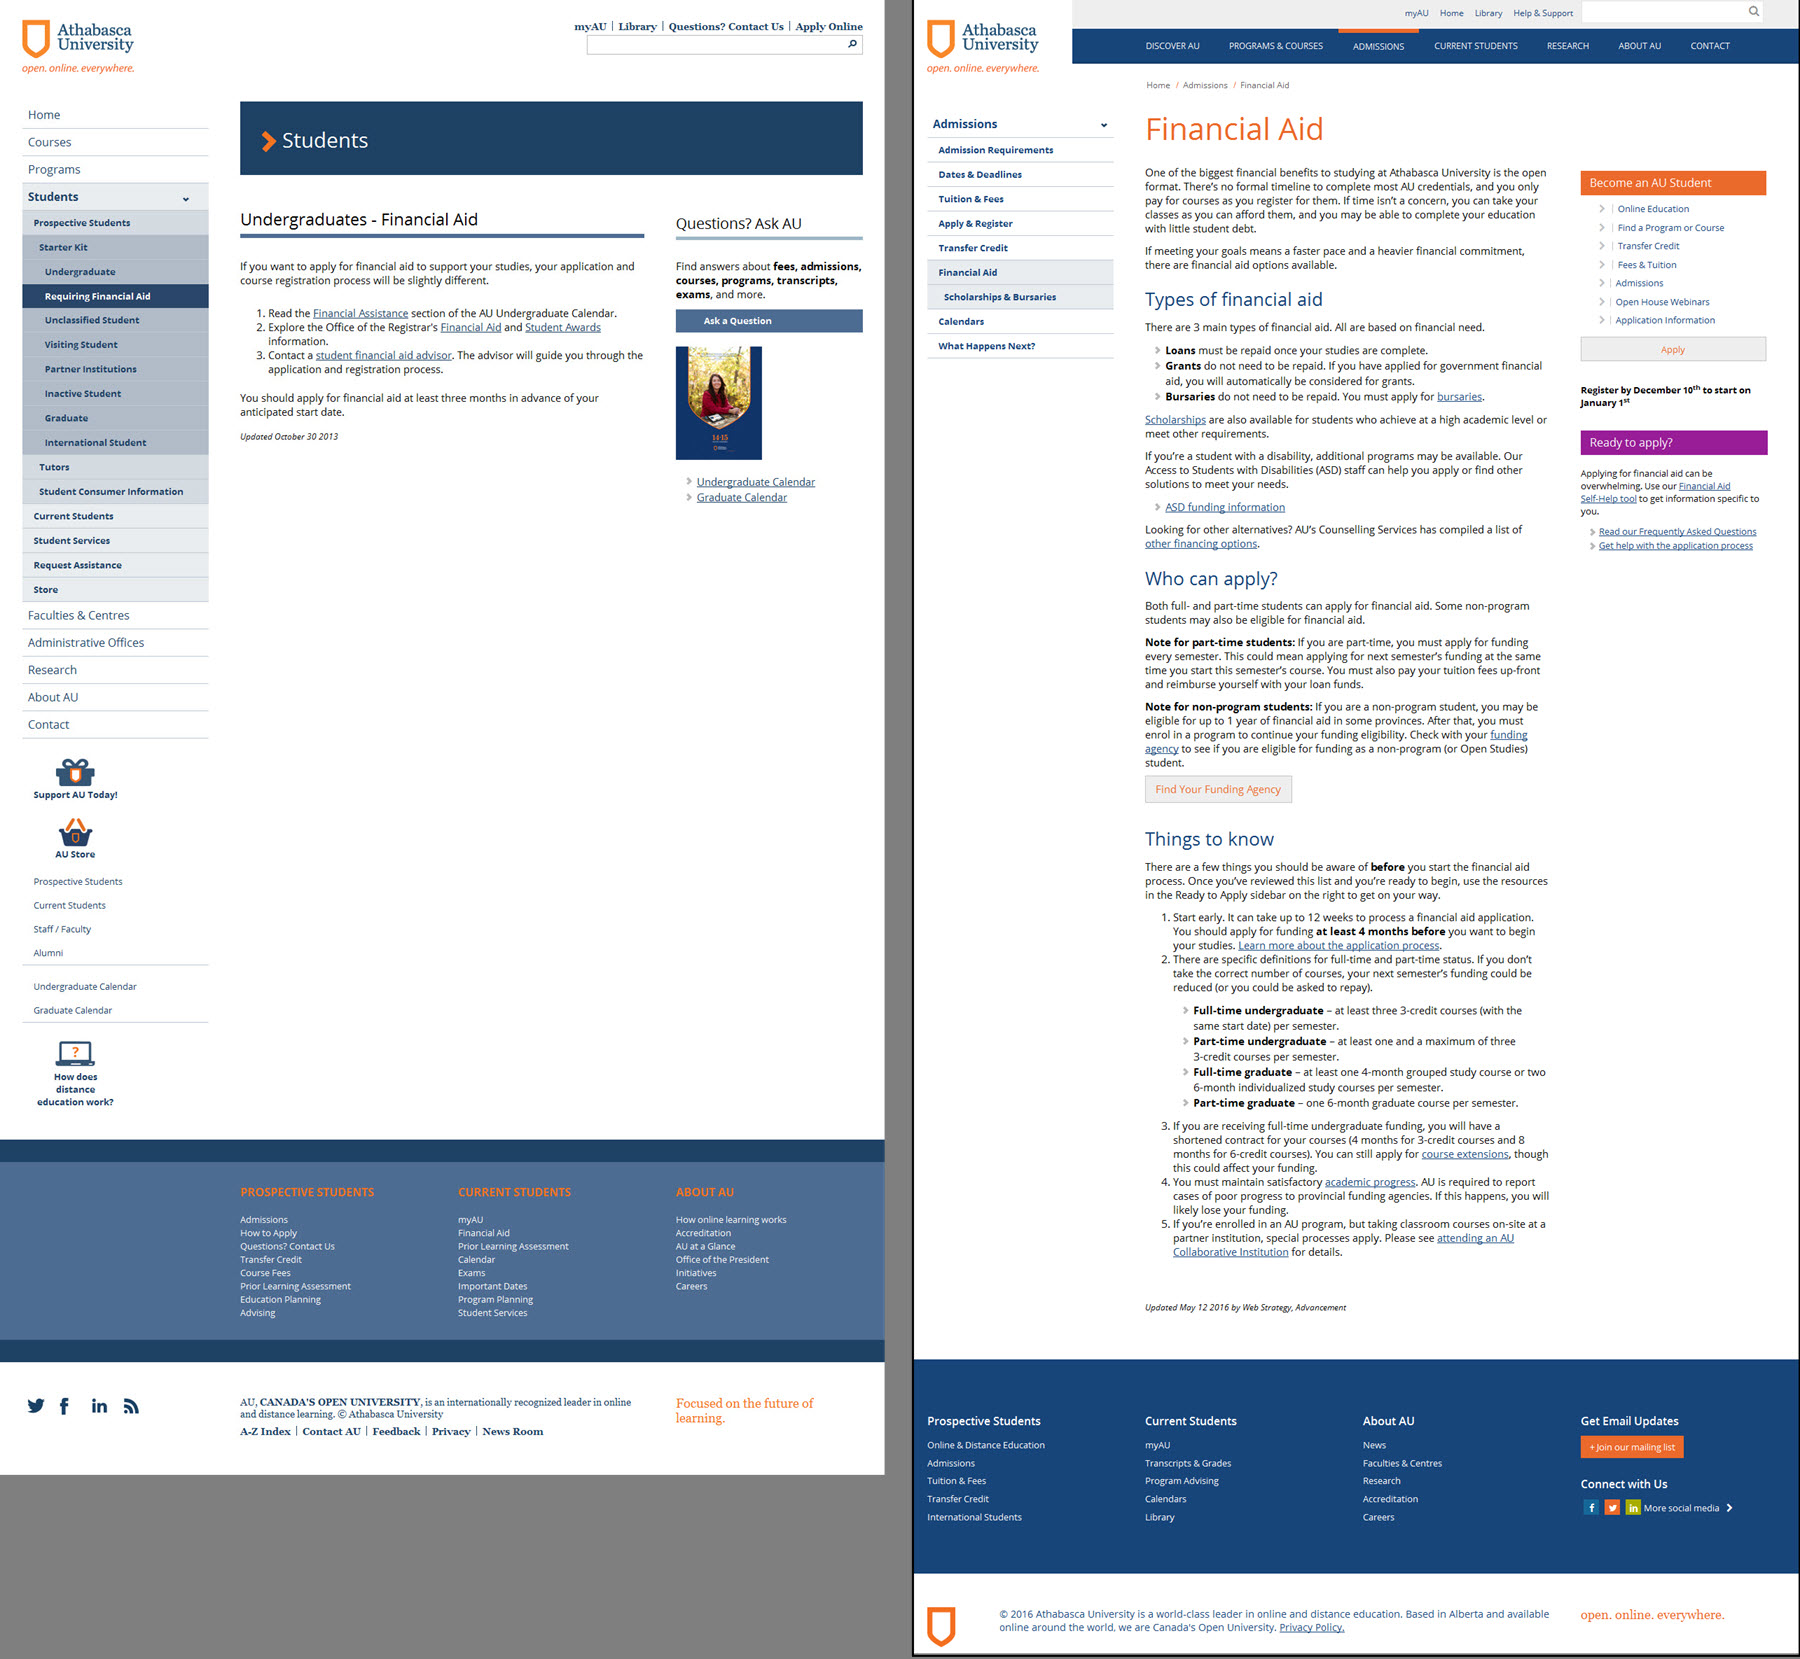 Comparison of original and revised versions of Athabasca University's financial aid page